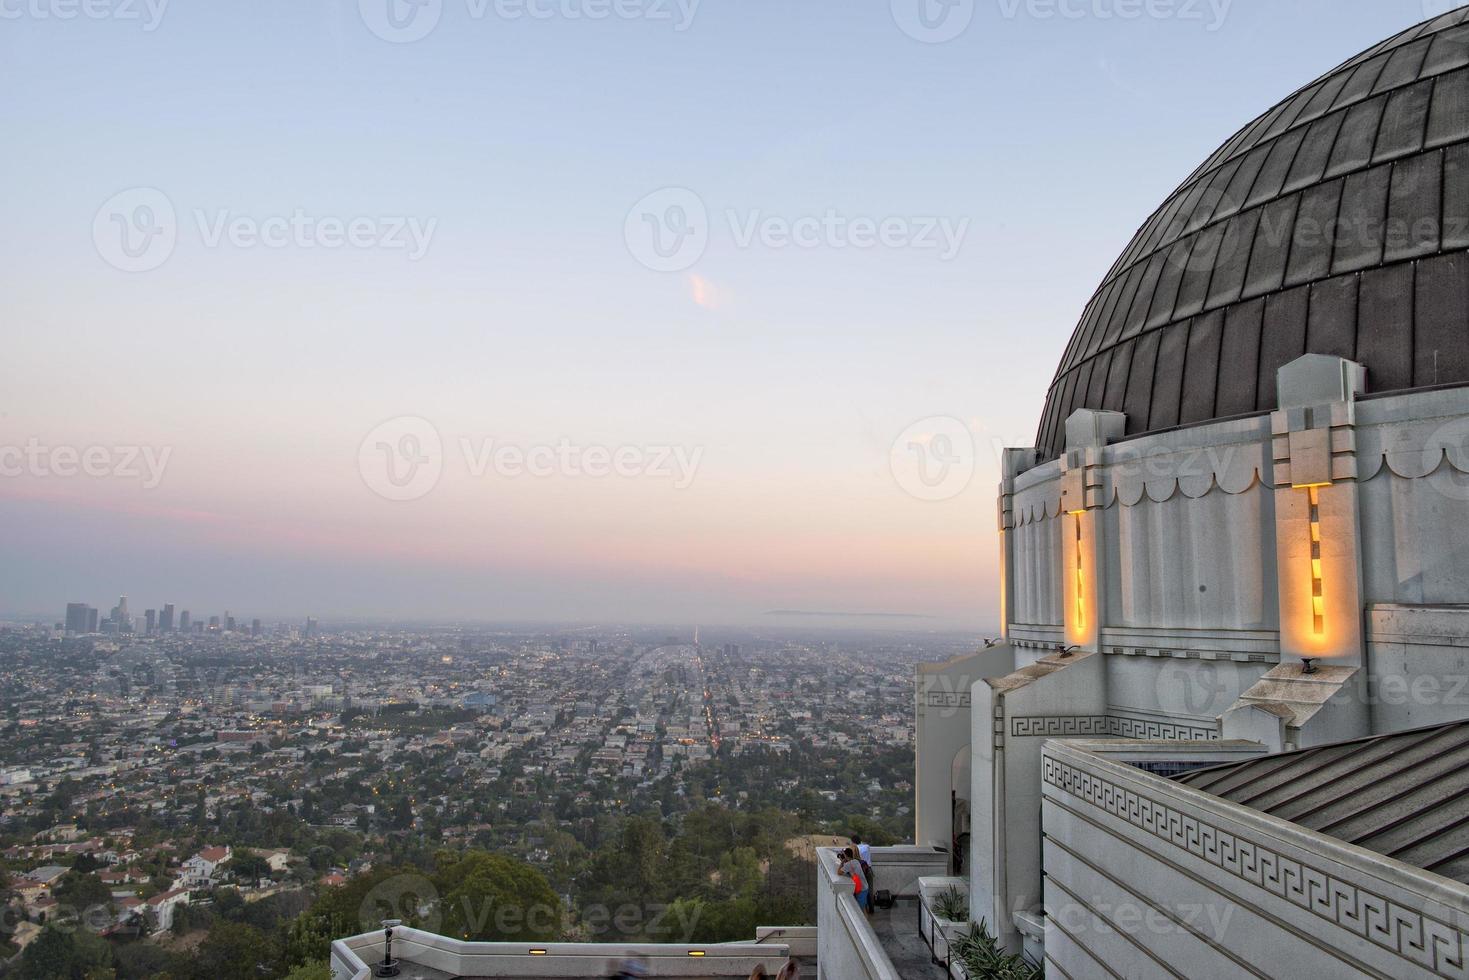 los angeles night view from observatory photo